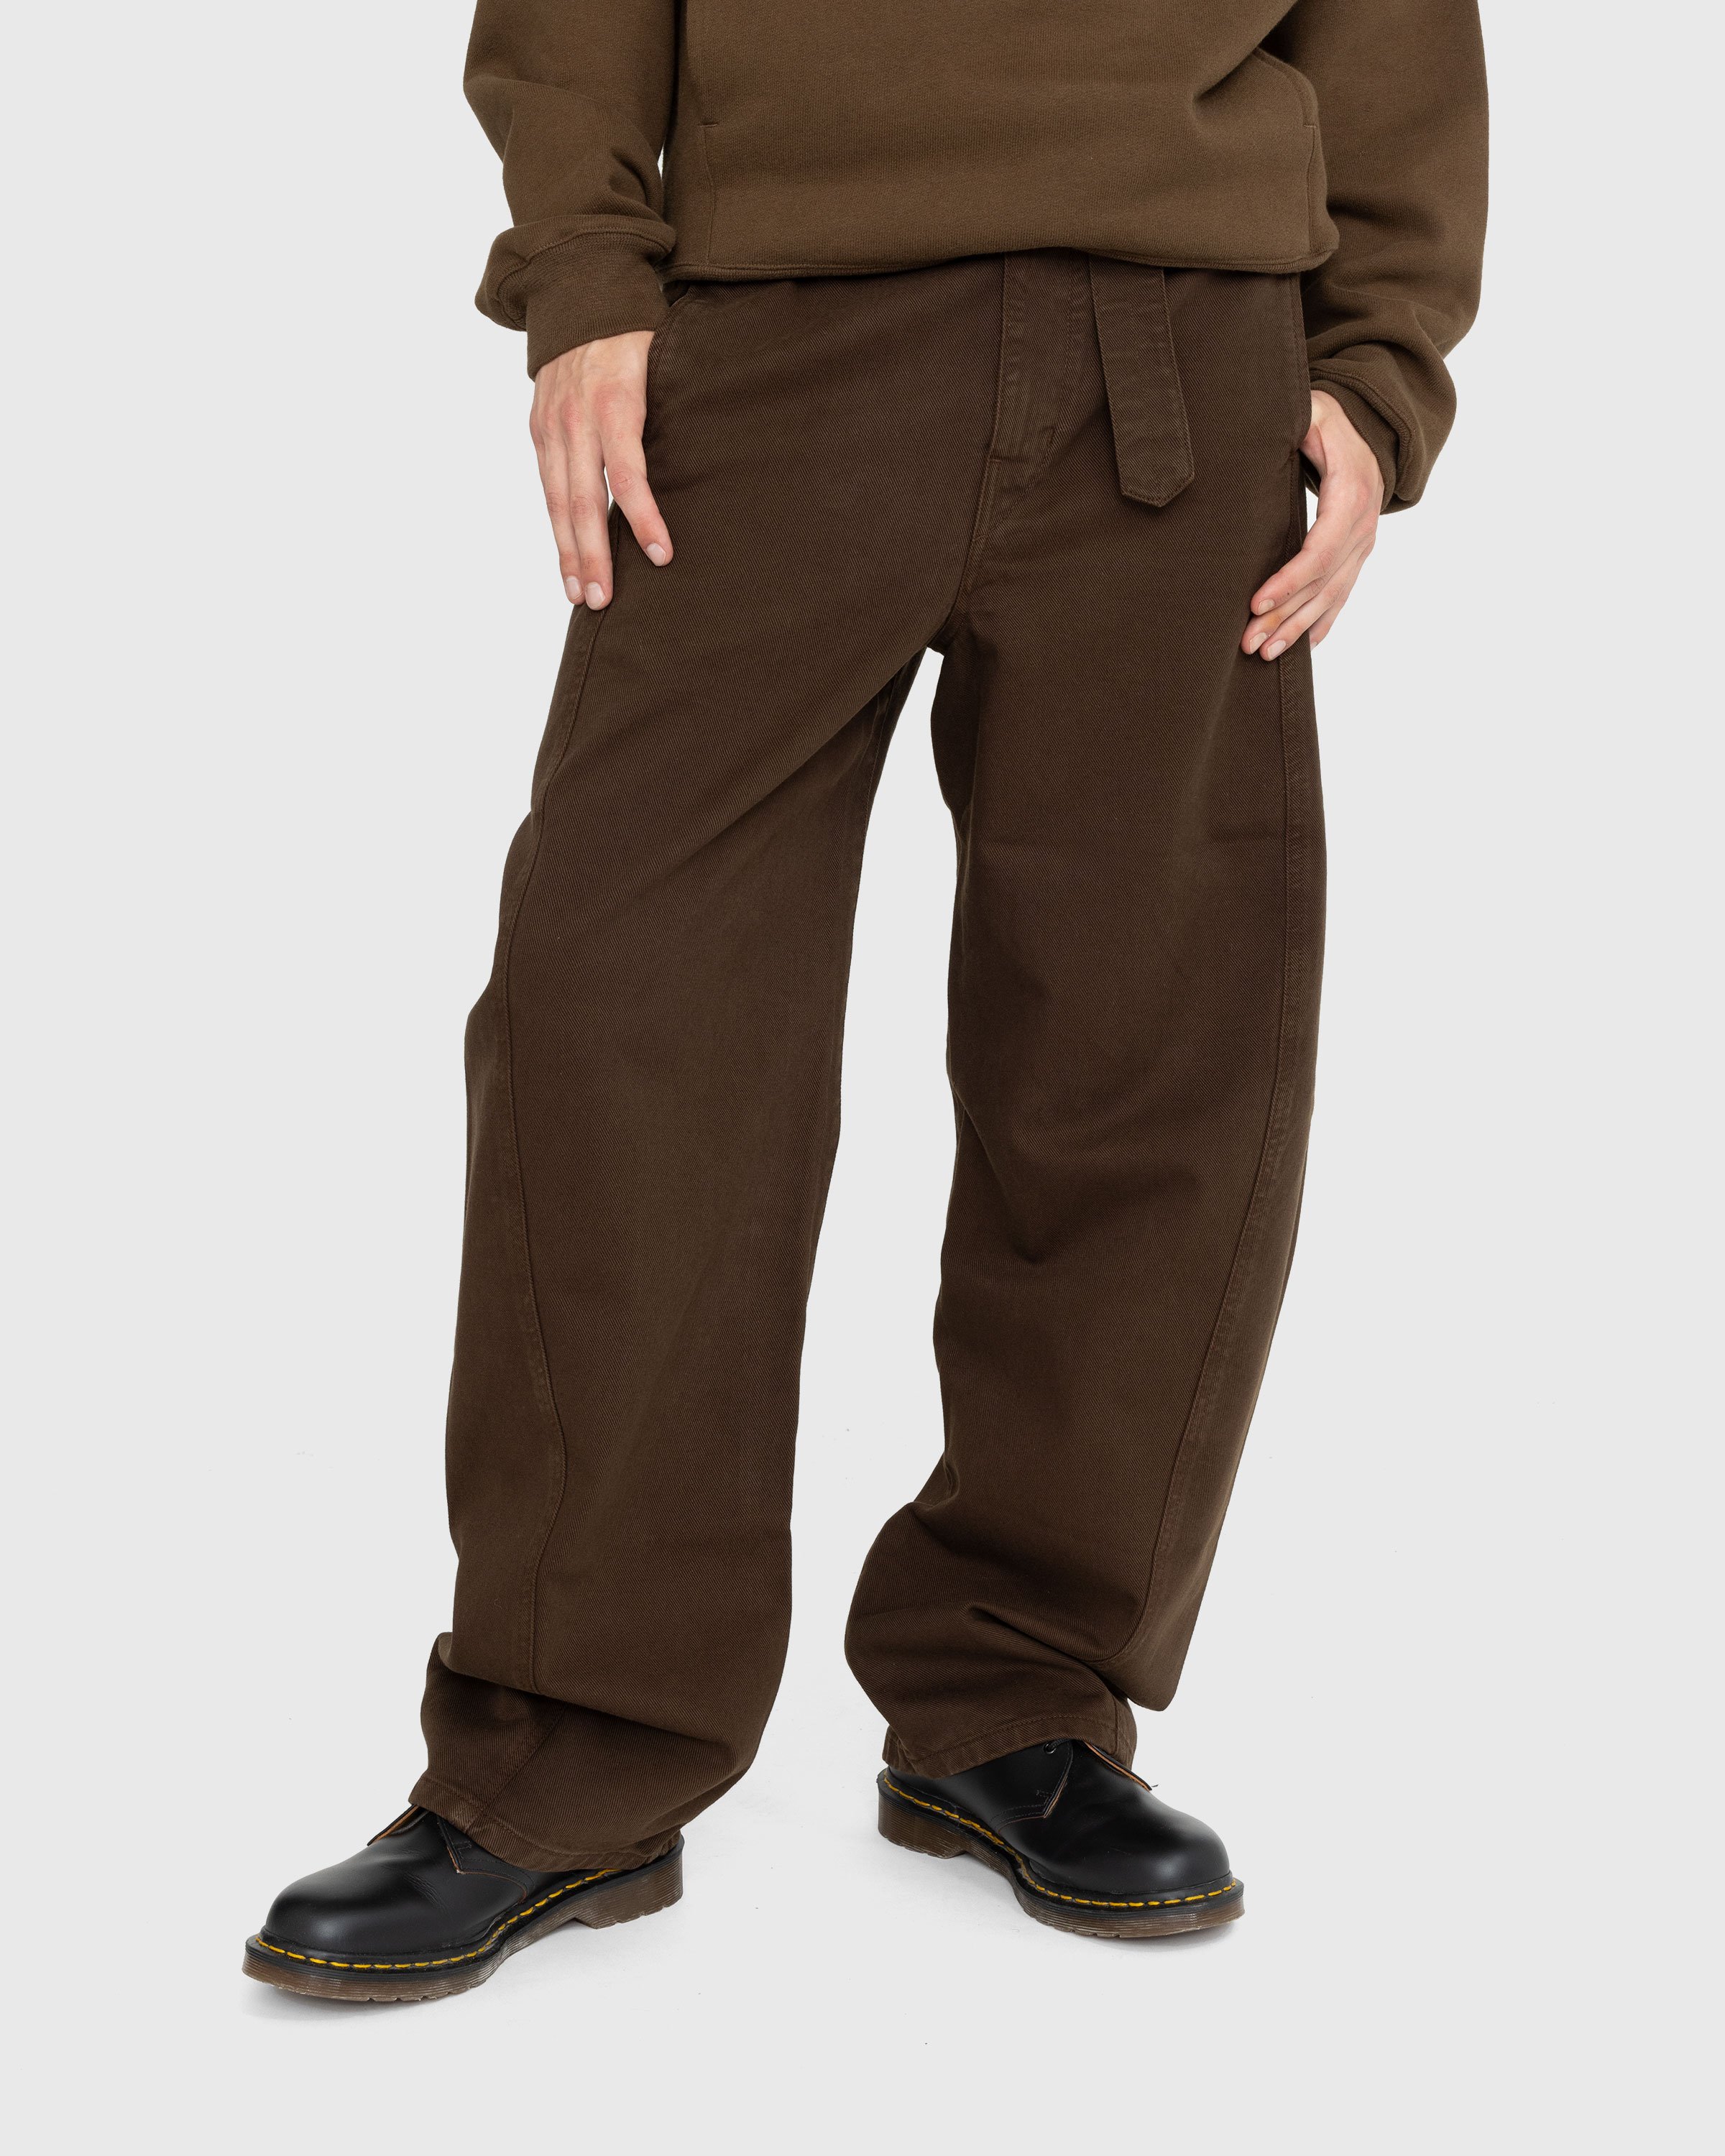 Lemaire - TWISTED BELTED CASUAL PANT - Clothing - Brown - Image 2